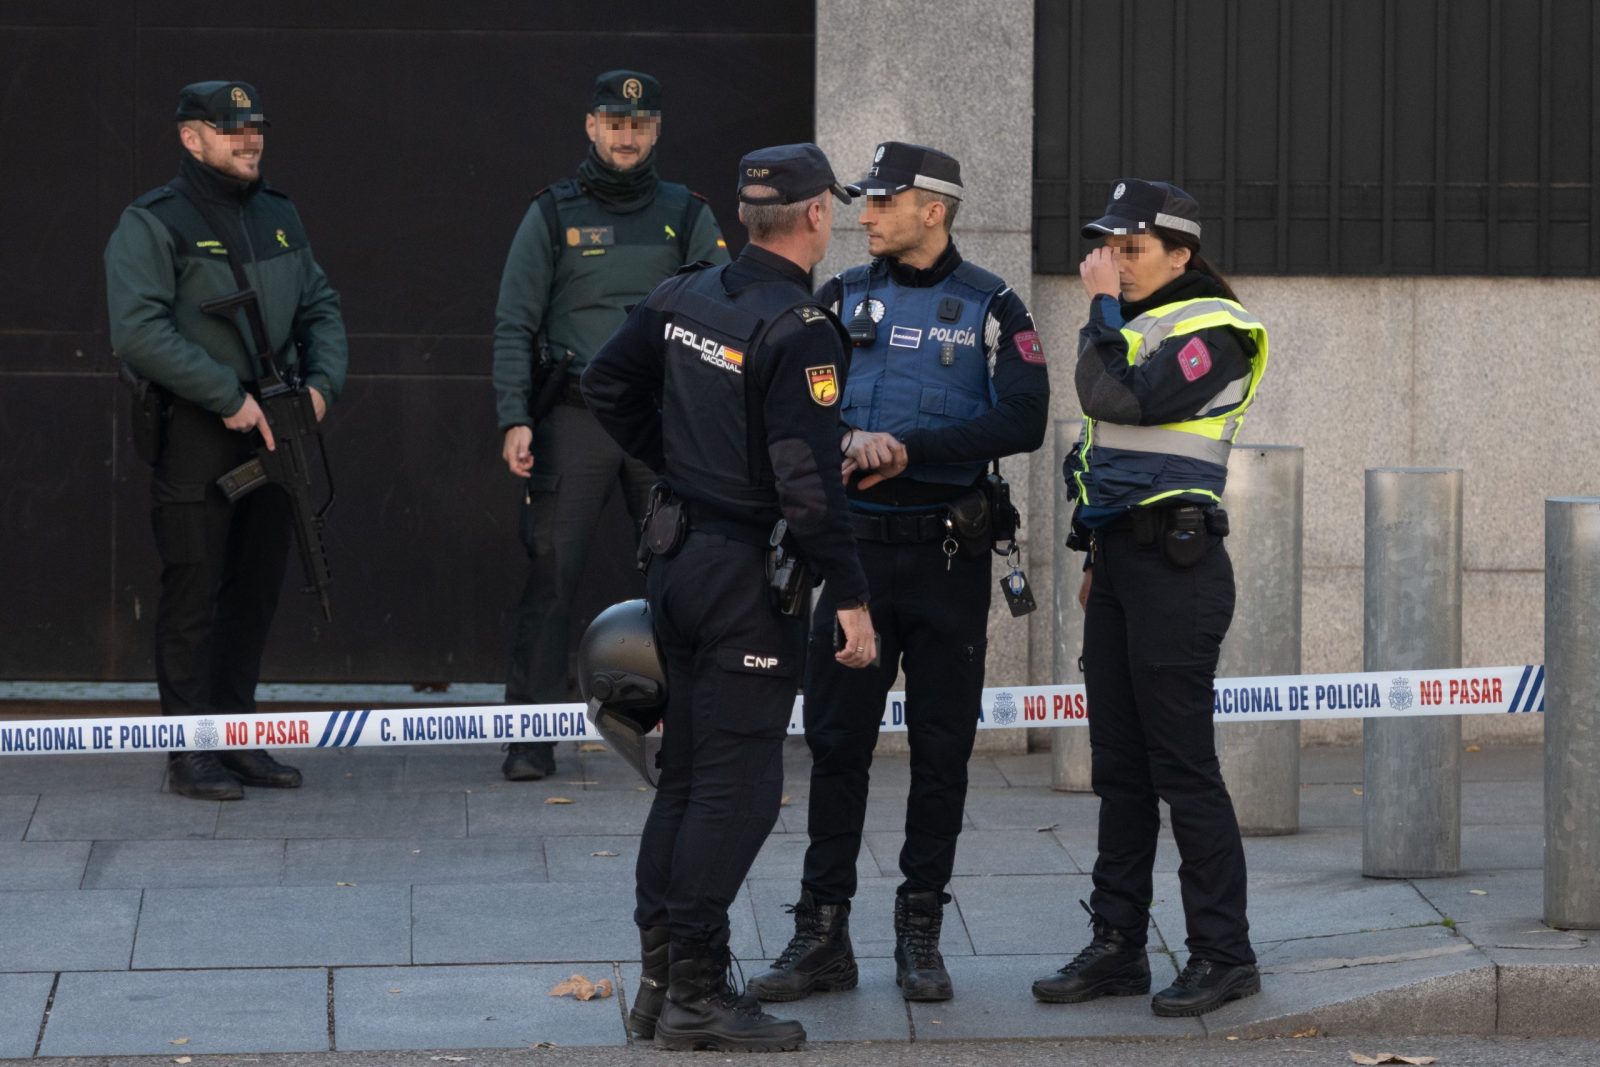 epa10341610 Members of Spanish Guardia Civil and National Police stand guard at the US Embassy in Madrid, Spain, 01 December 2022. A bomb letter has been found at the US Embassy in Madrid, addressed to the US ambassador. So far, five different bomb letters have been found within the last few hours, some intended to be received by Spanish prime minister, another one sent to the Spanish Ministry of Defense, two to the Ukrainian and US embassies in Madrid, and one more received by a company in the northern city of Zaragoza. ATTENTION EDITORS: FACES PIXELATED AT SOURCE.  EPA/FERNANDO VILLAR